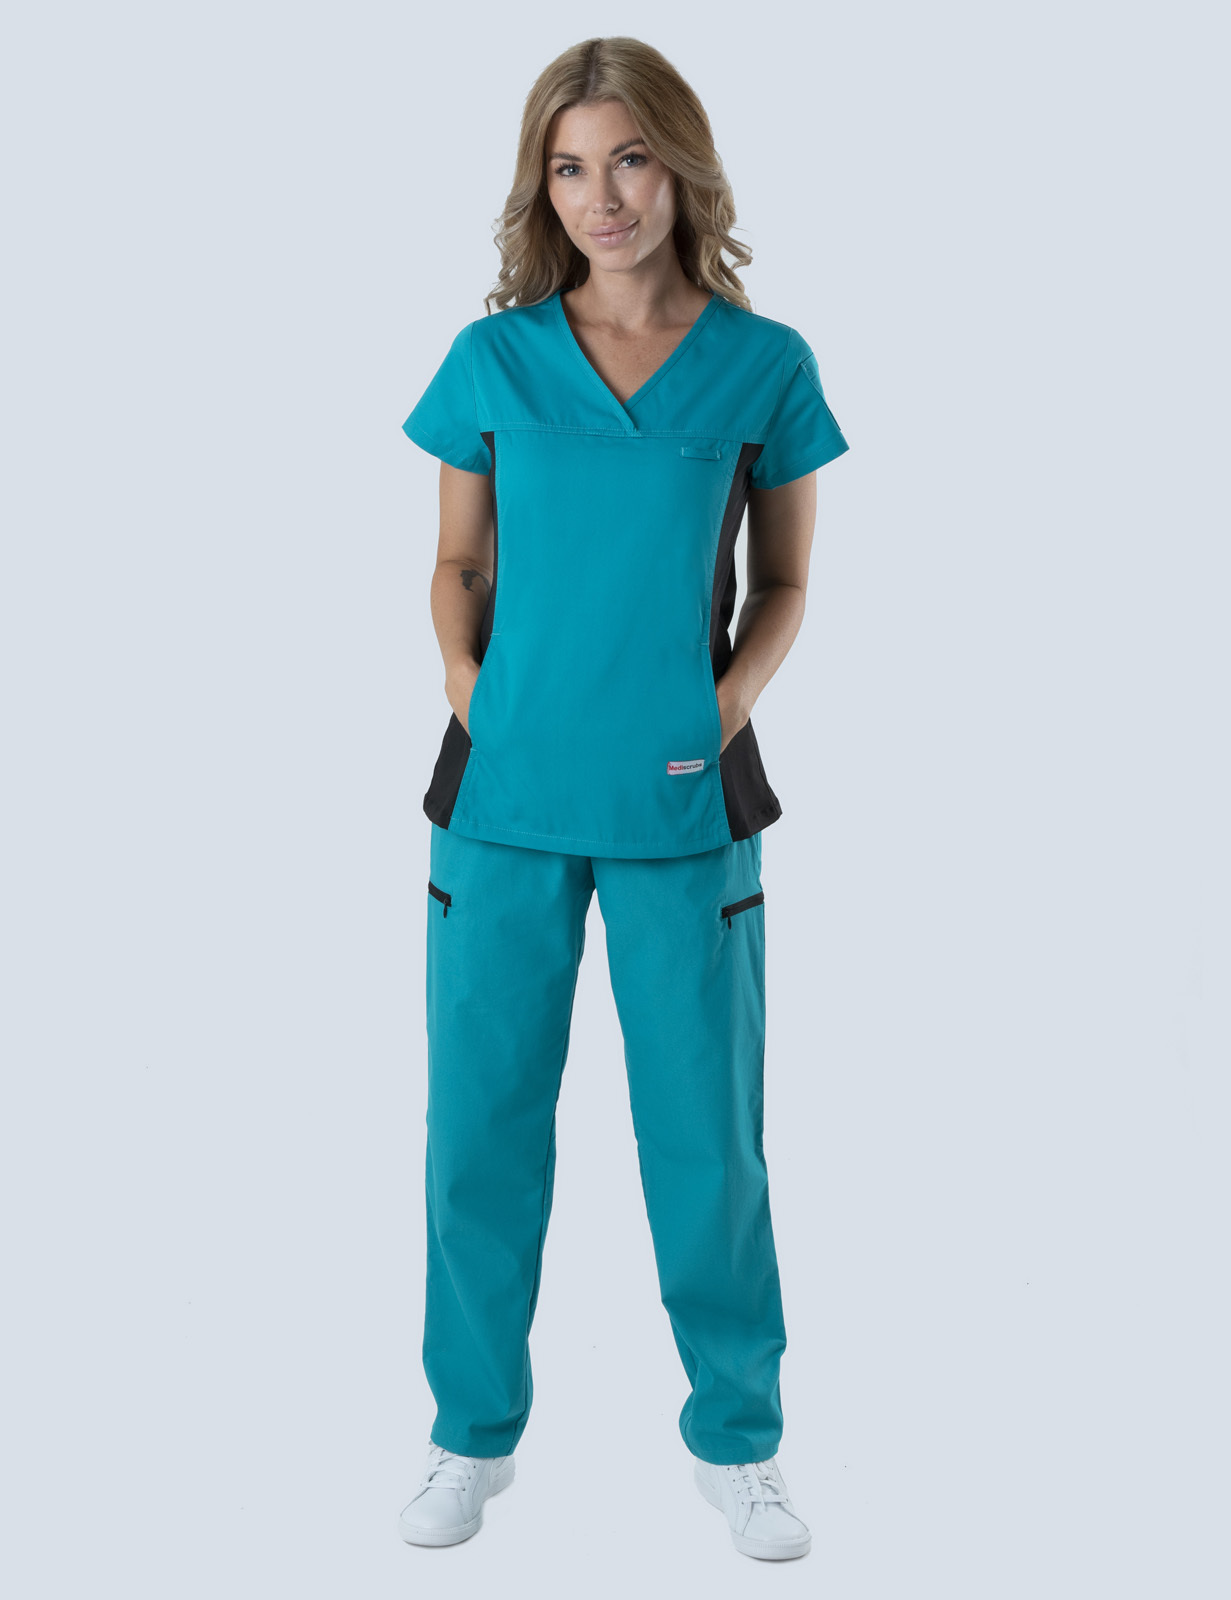 Women's Fit Solid Scrub Top With Spandex Panel - Teal - XX Small